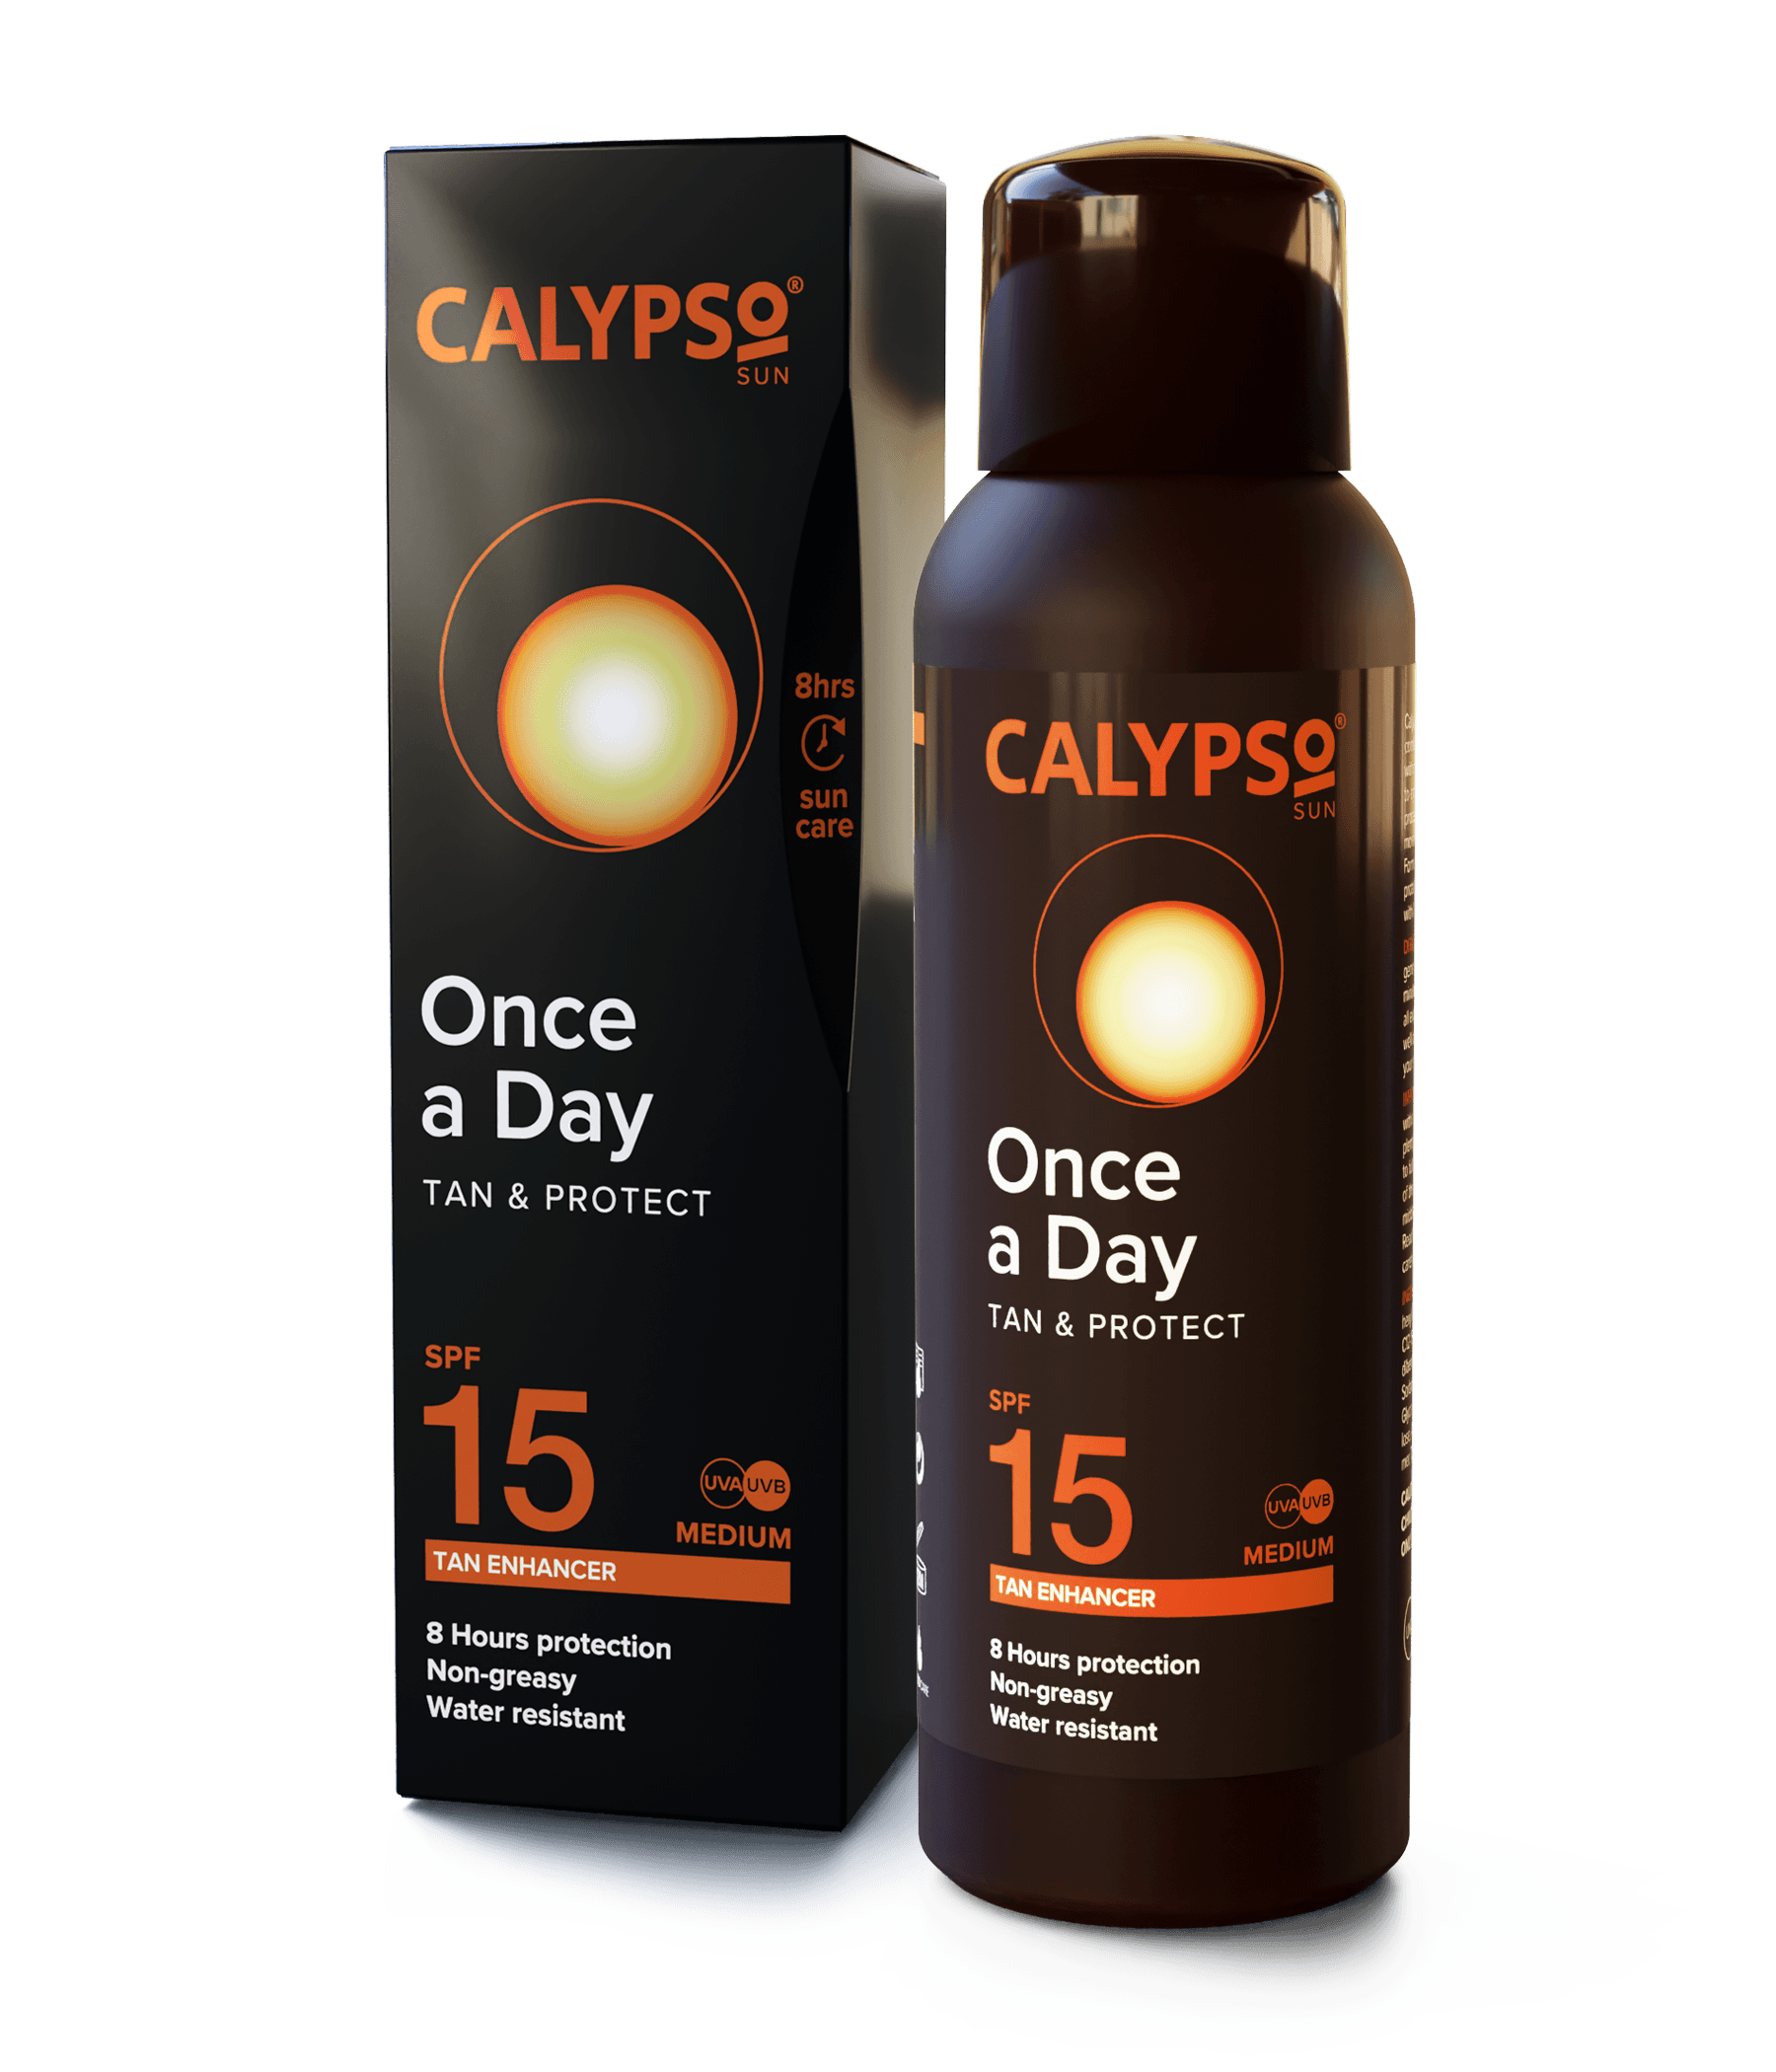 Calypso Once a Day Tan and Protect with Tan Extender SPF 15 box and bottle